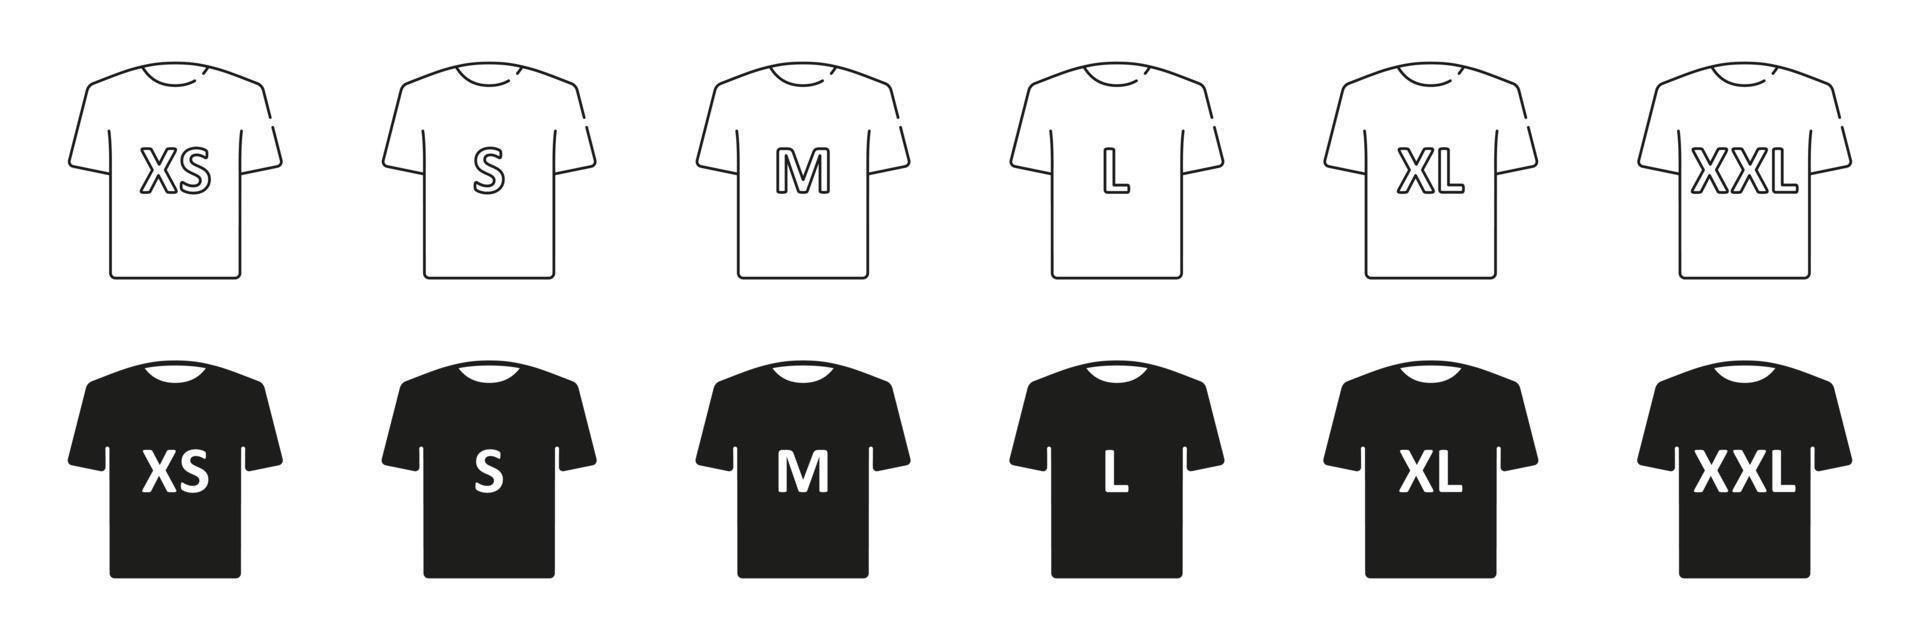 T-shirt Size Black Silhouette and Line Icons Set. Human Clothing Size Label. Man or Woman T-Shirt Size Tag. Isolated Vector Illustration.